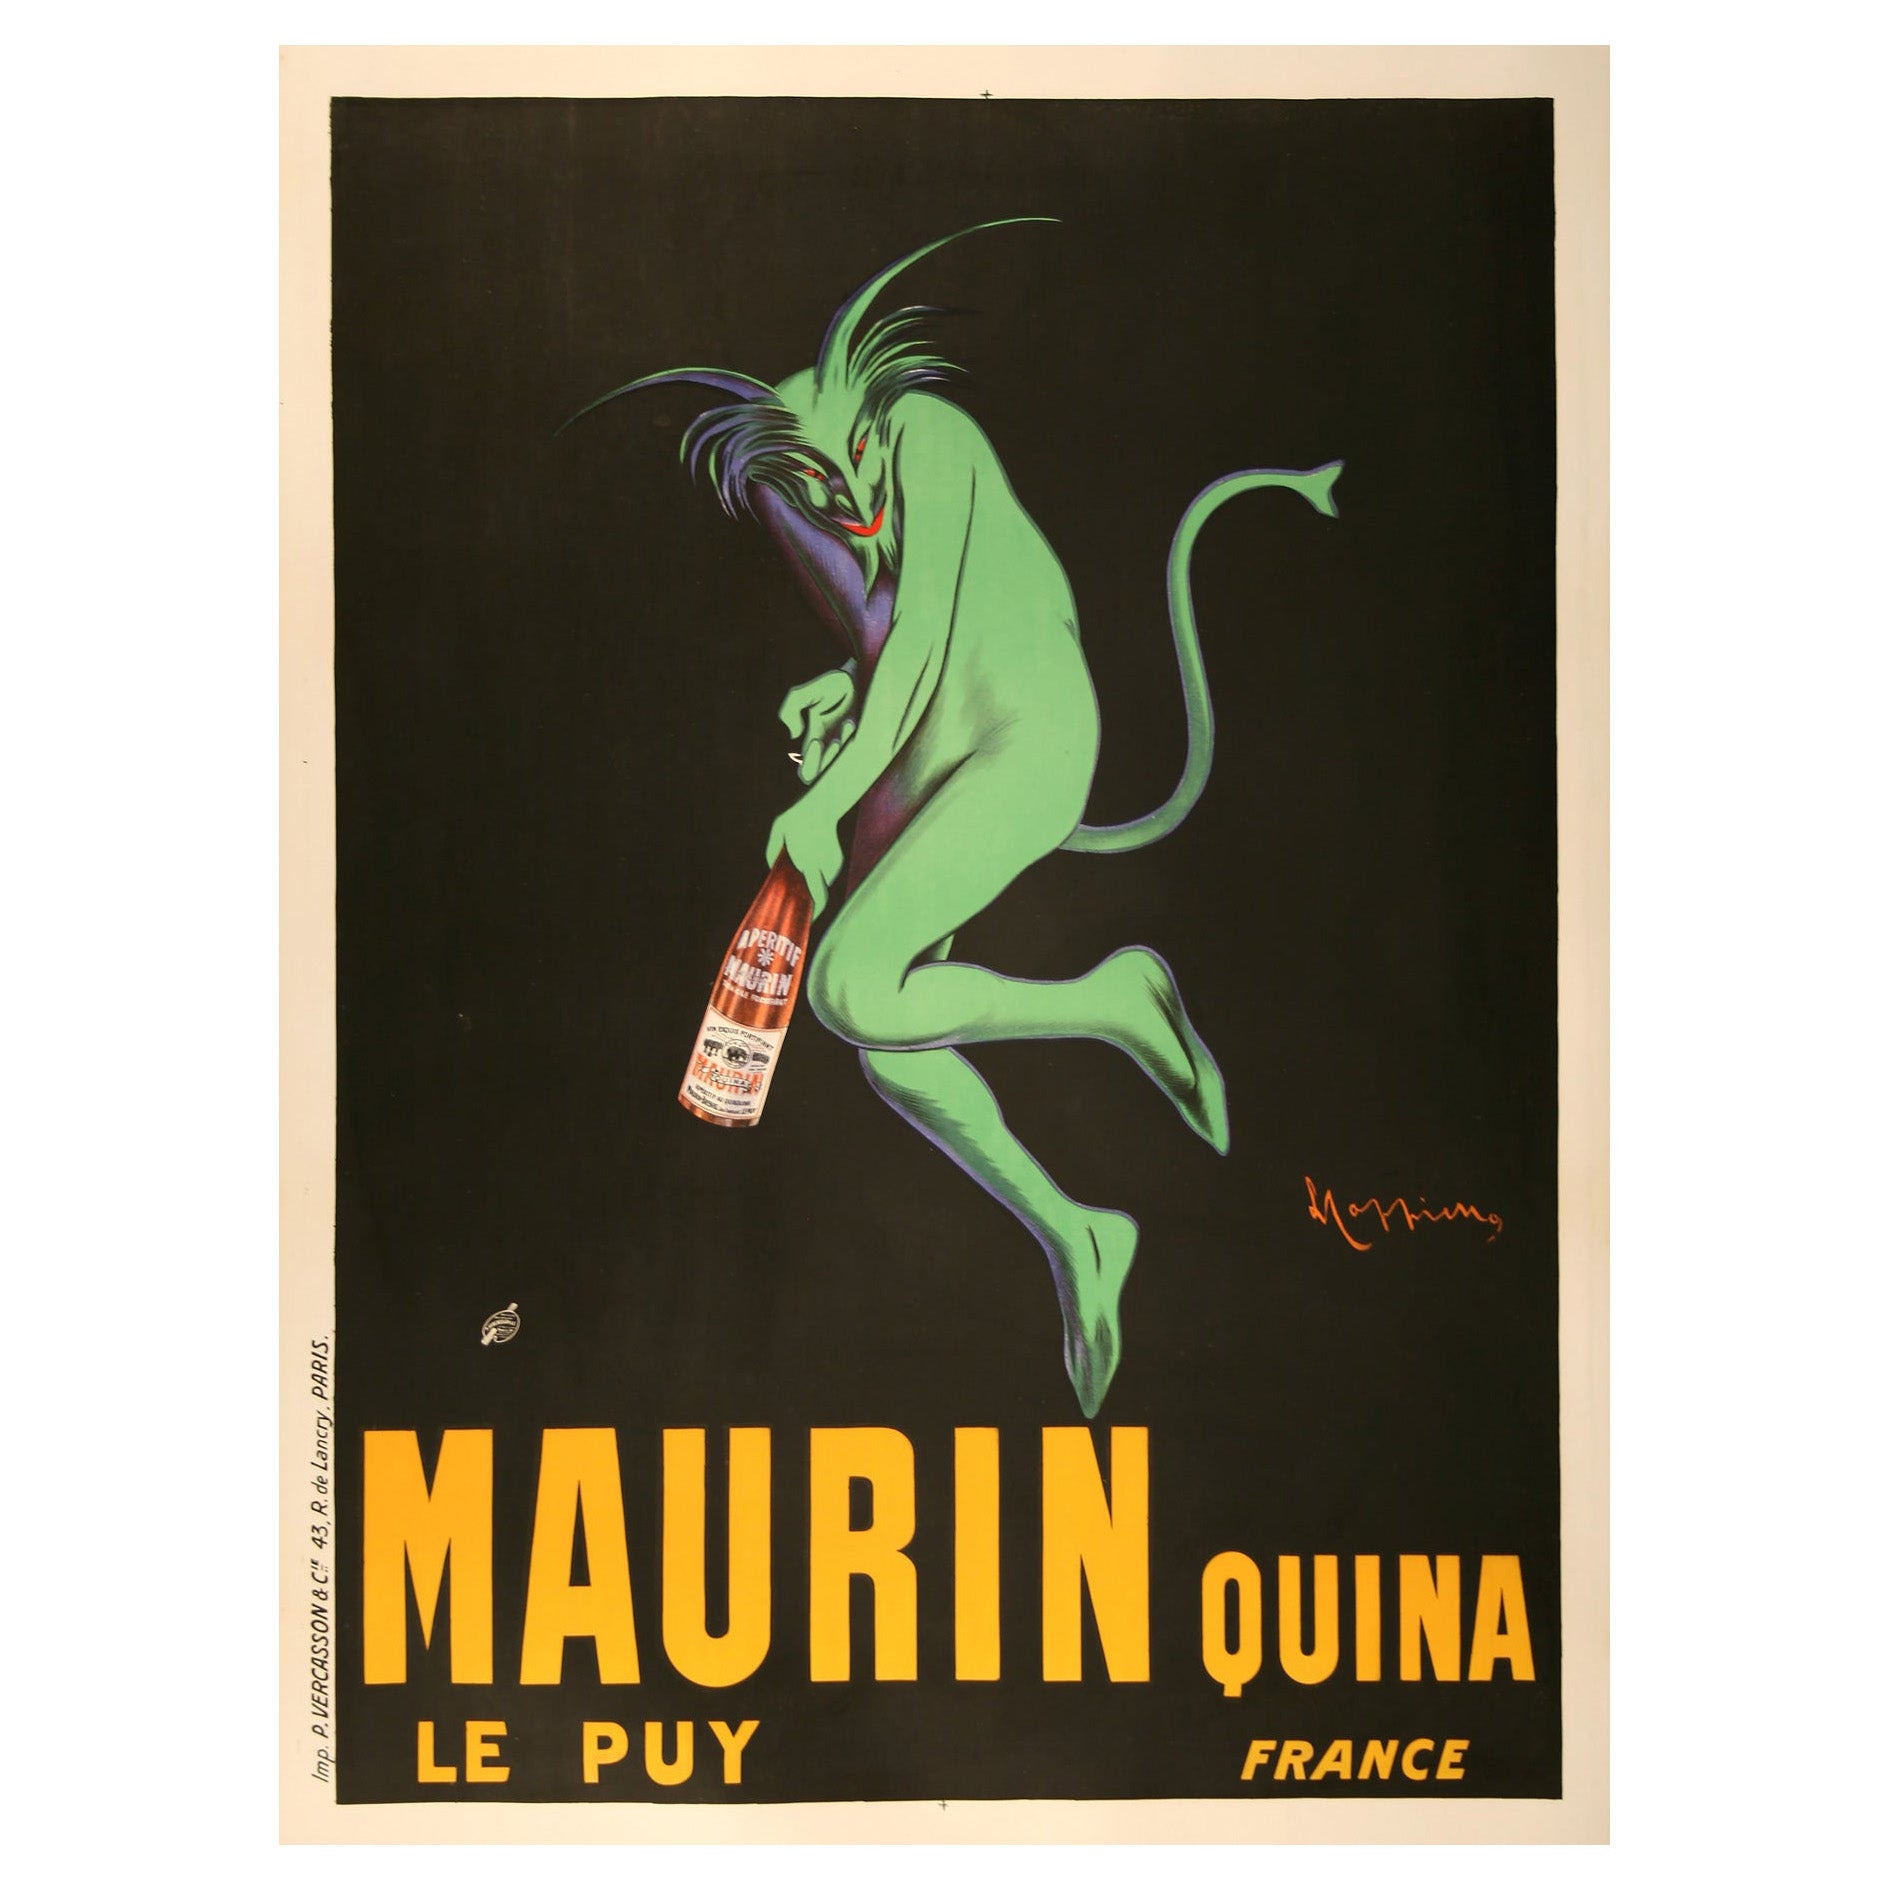 Maurin Quina, 1906 Vintage French Alcohol Advertising Poster, Cappiello For Sale